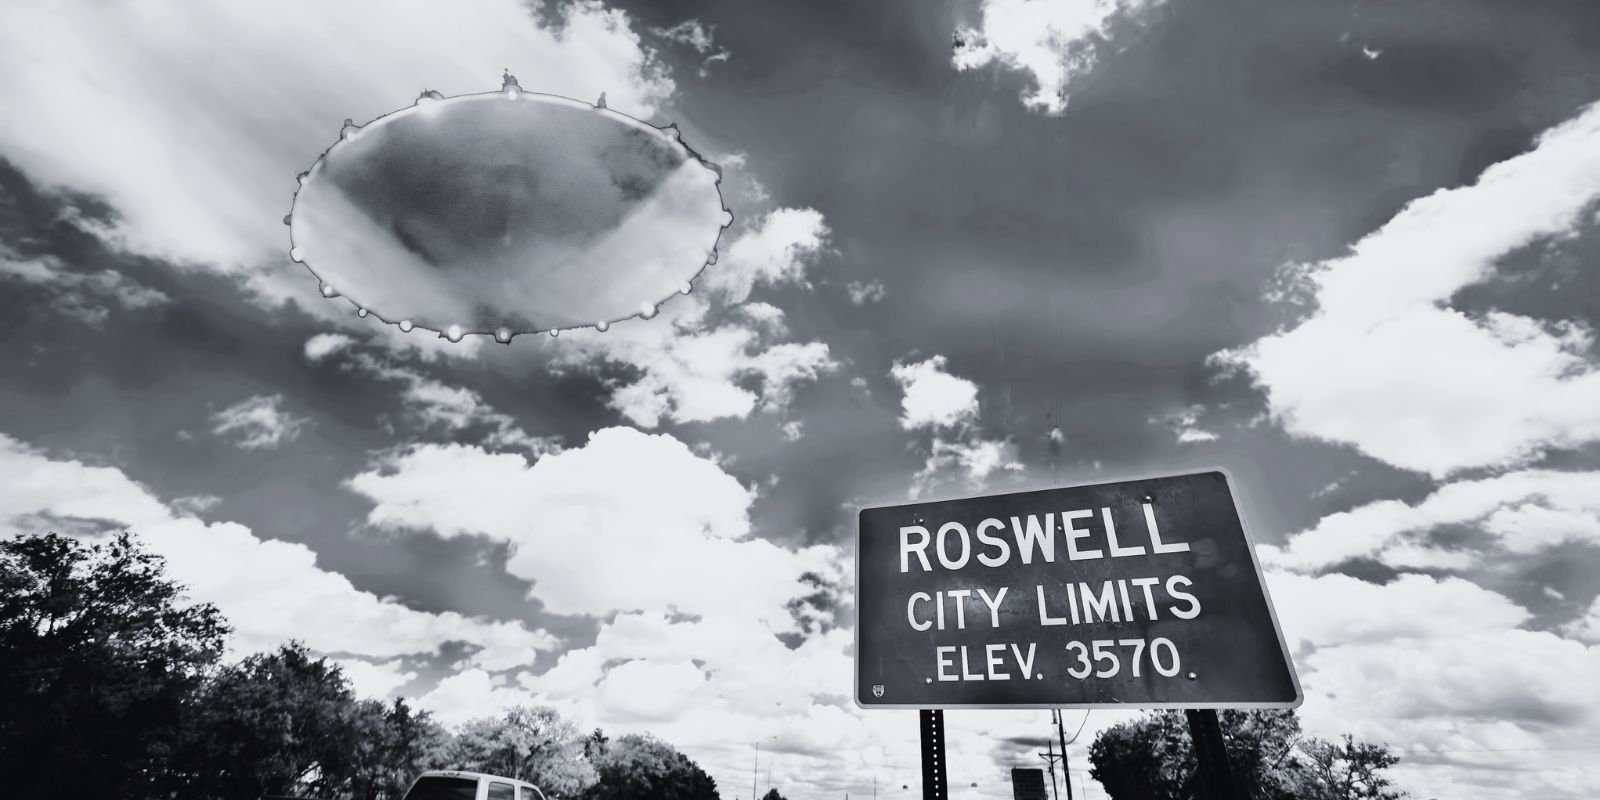 July 7th: Extraterrestrial Object Crashed Into A Ranch In Roswell